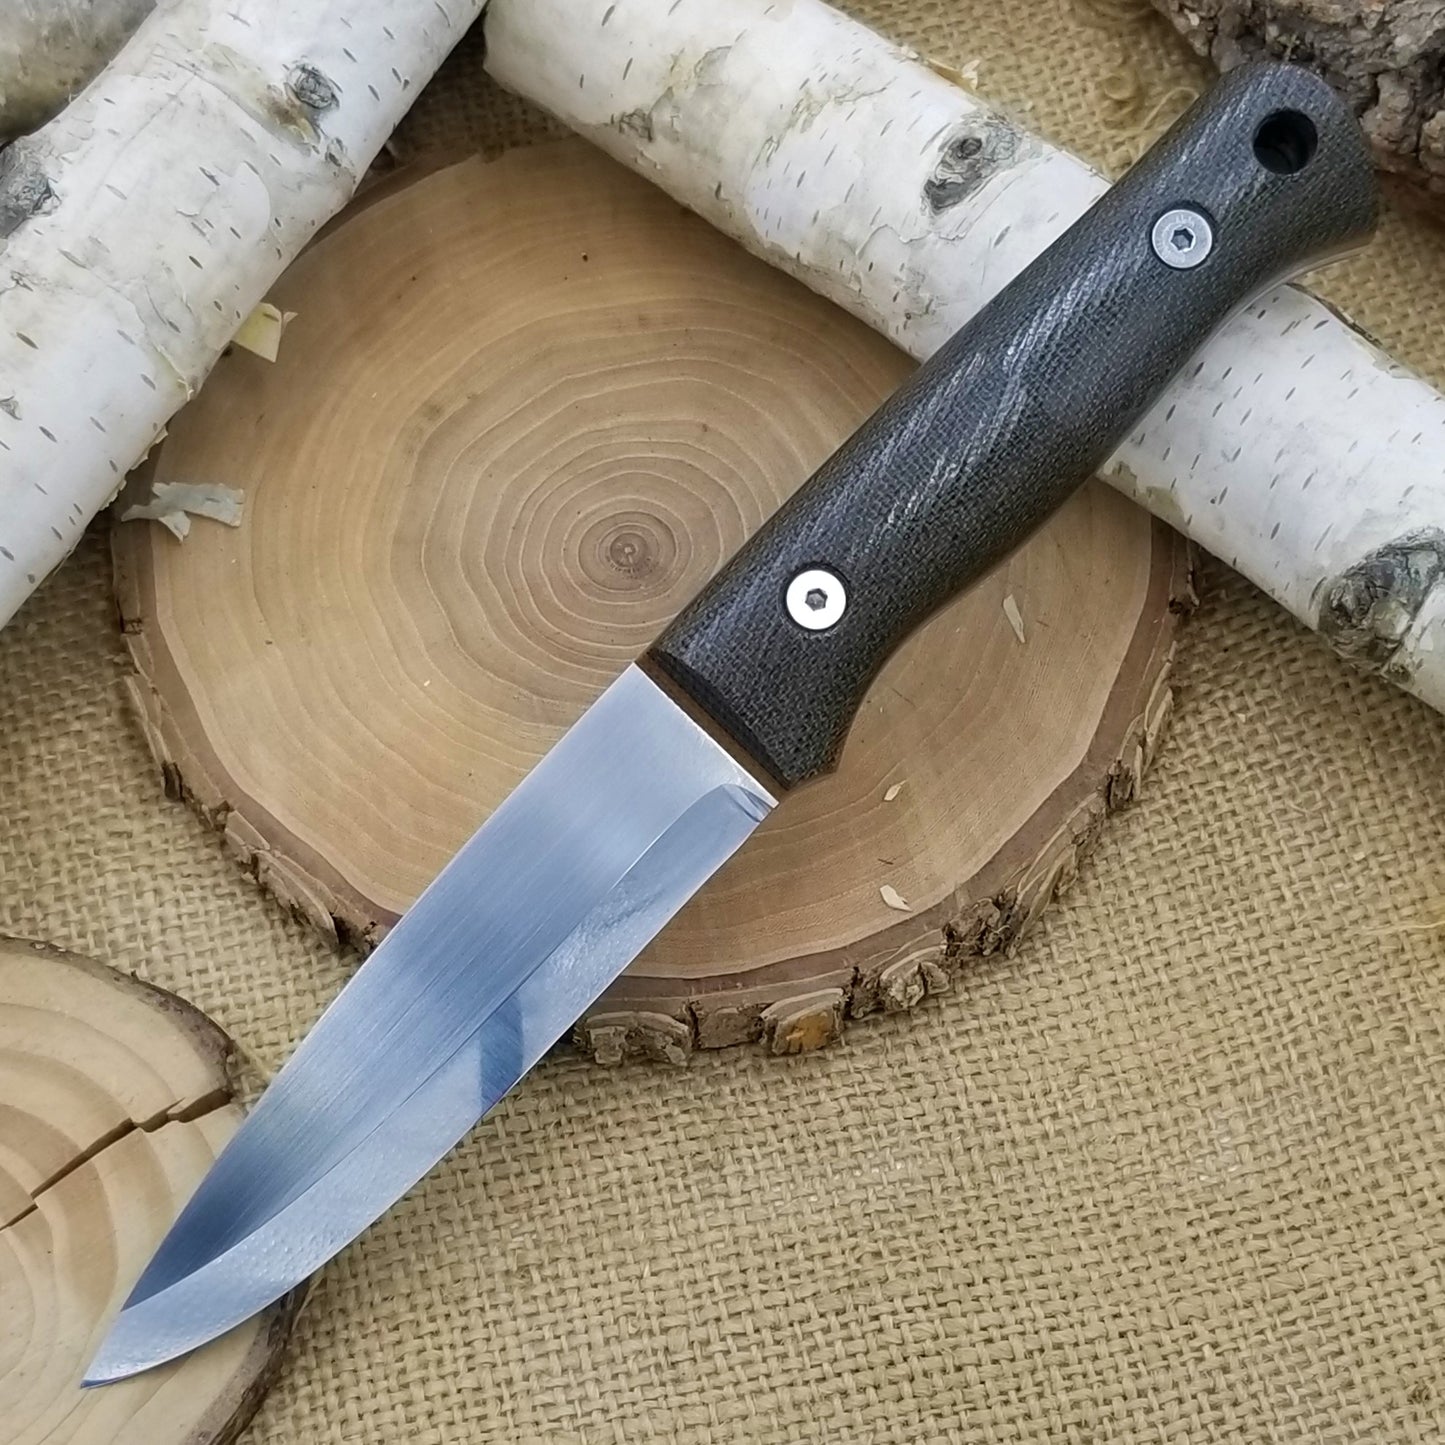 Classic: Green Canvas Micarta over Natural Brown Canvas (r-series)